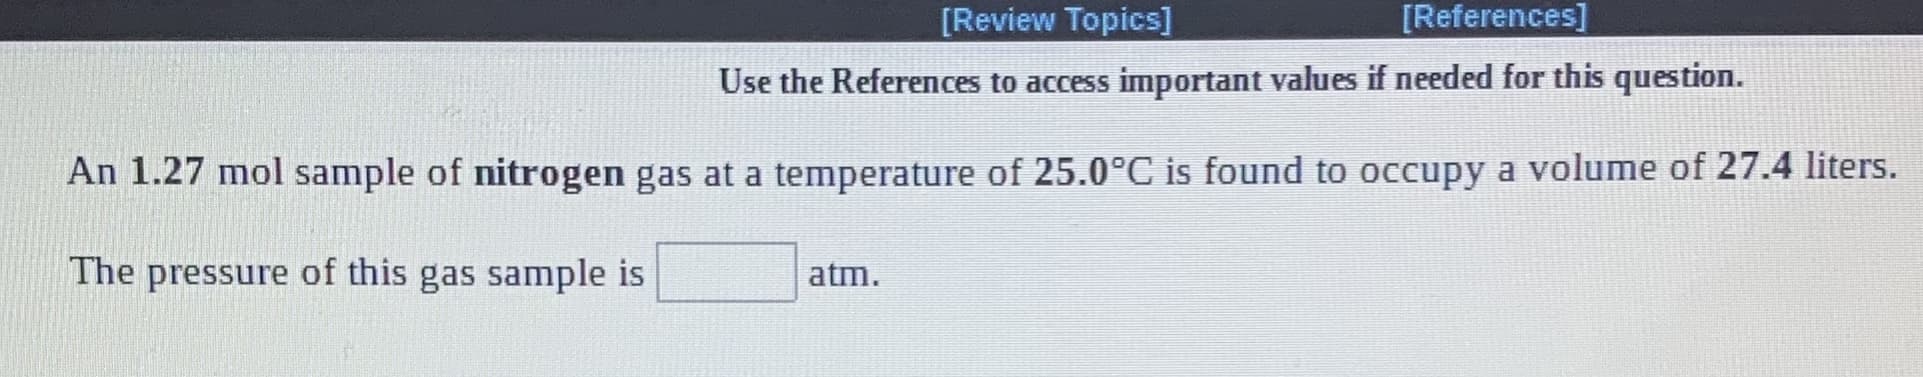 [Review Topics]
[References]
Use the References to access important values if needed for this question.
An 1.27 mol sample of nitrogen gas at a temperature of 25.0°C is found to occupy a volume of 27.4 liters.
The pressure of this gas sample is
atm.
